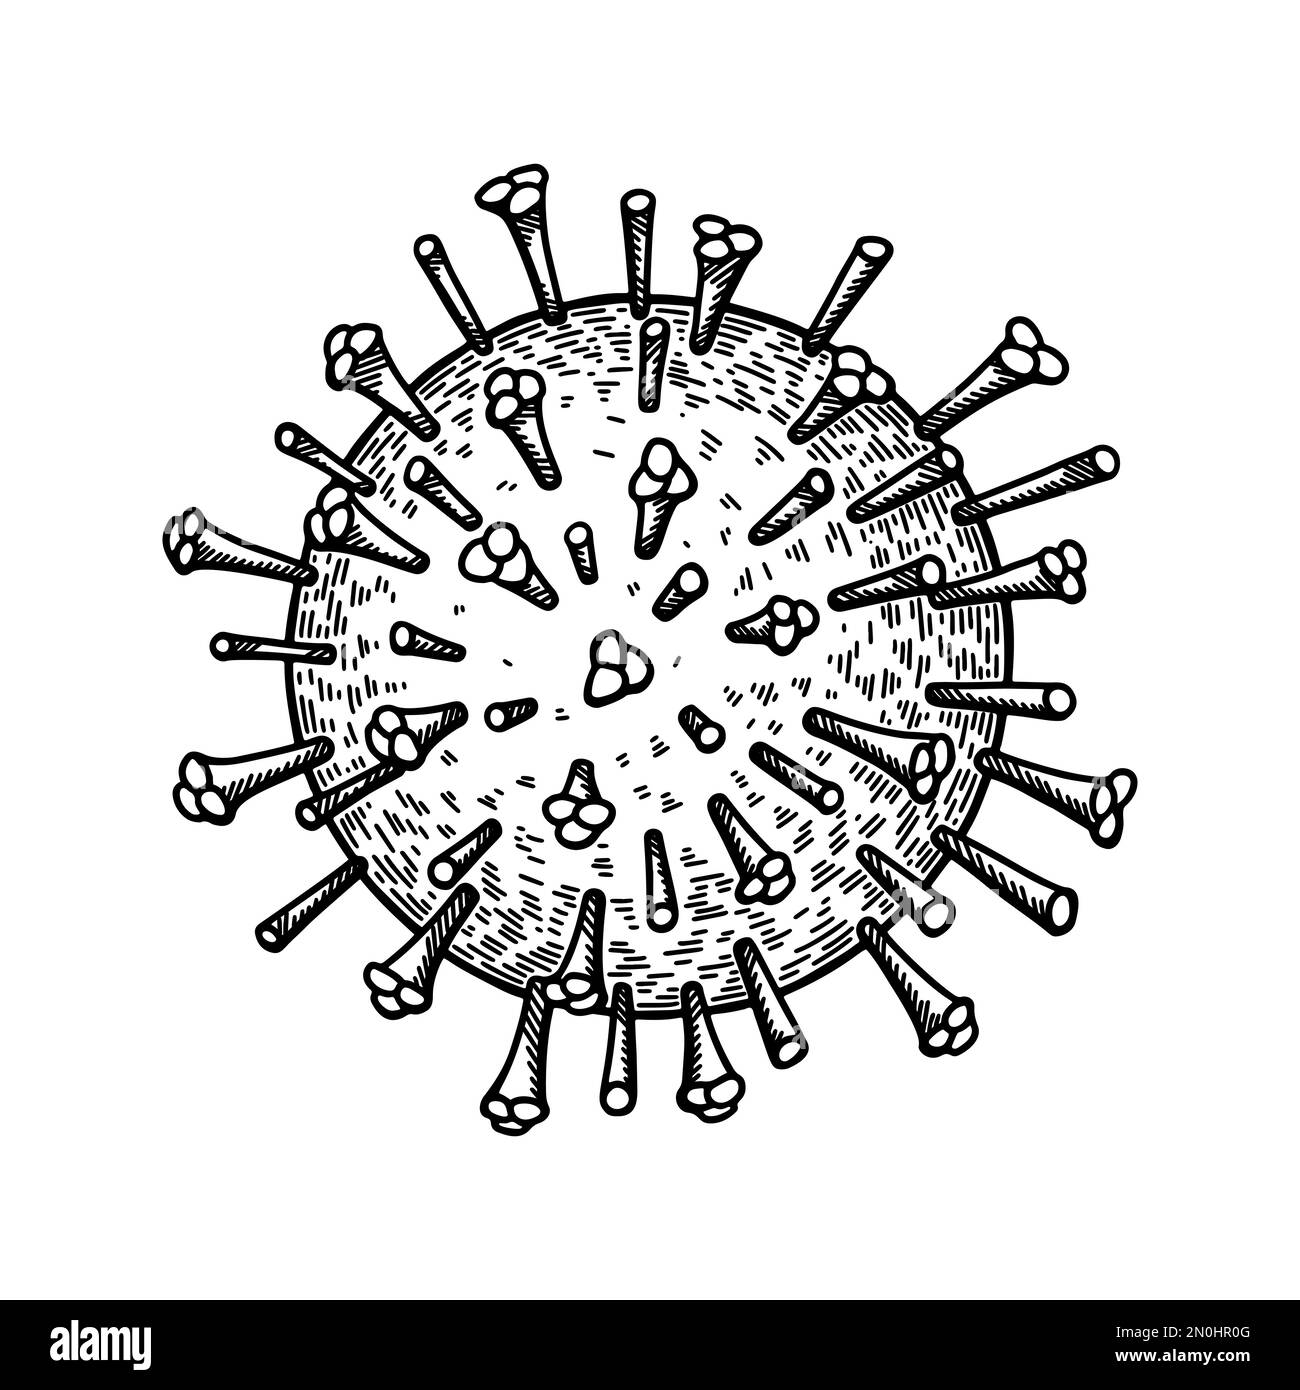 Influenza virus isolated on white background. Hand drawn realistic detailed scientifical vector illustration in sketch style Stock Vector